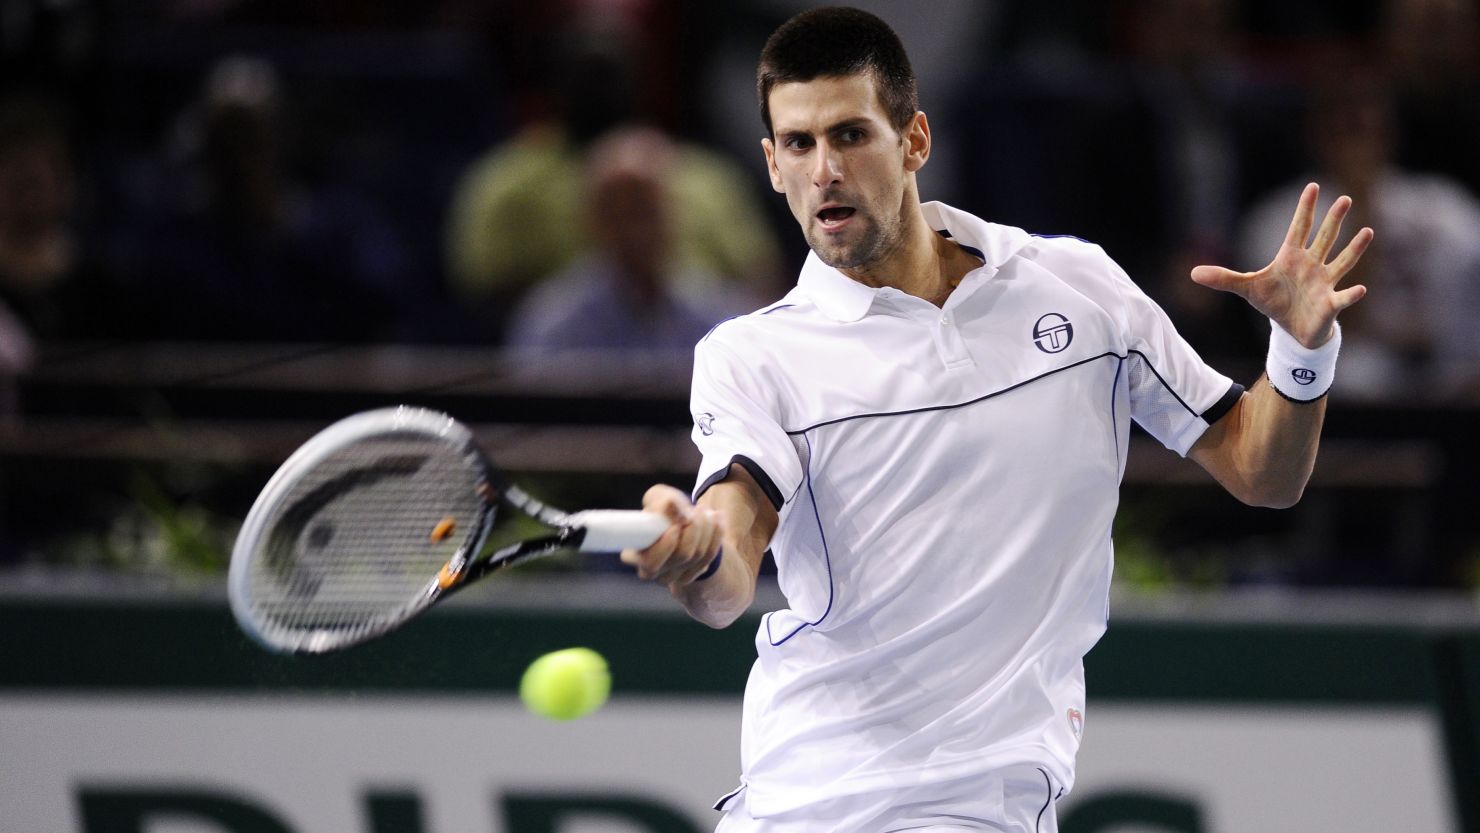 By playing on Wednesday, Novak Djokovic ensured he will pick up a bonus check for $1.6 million.